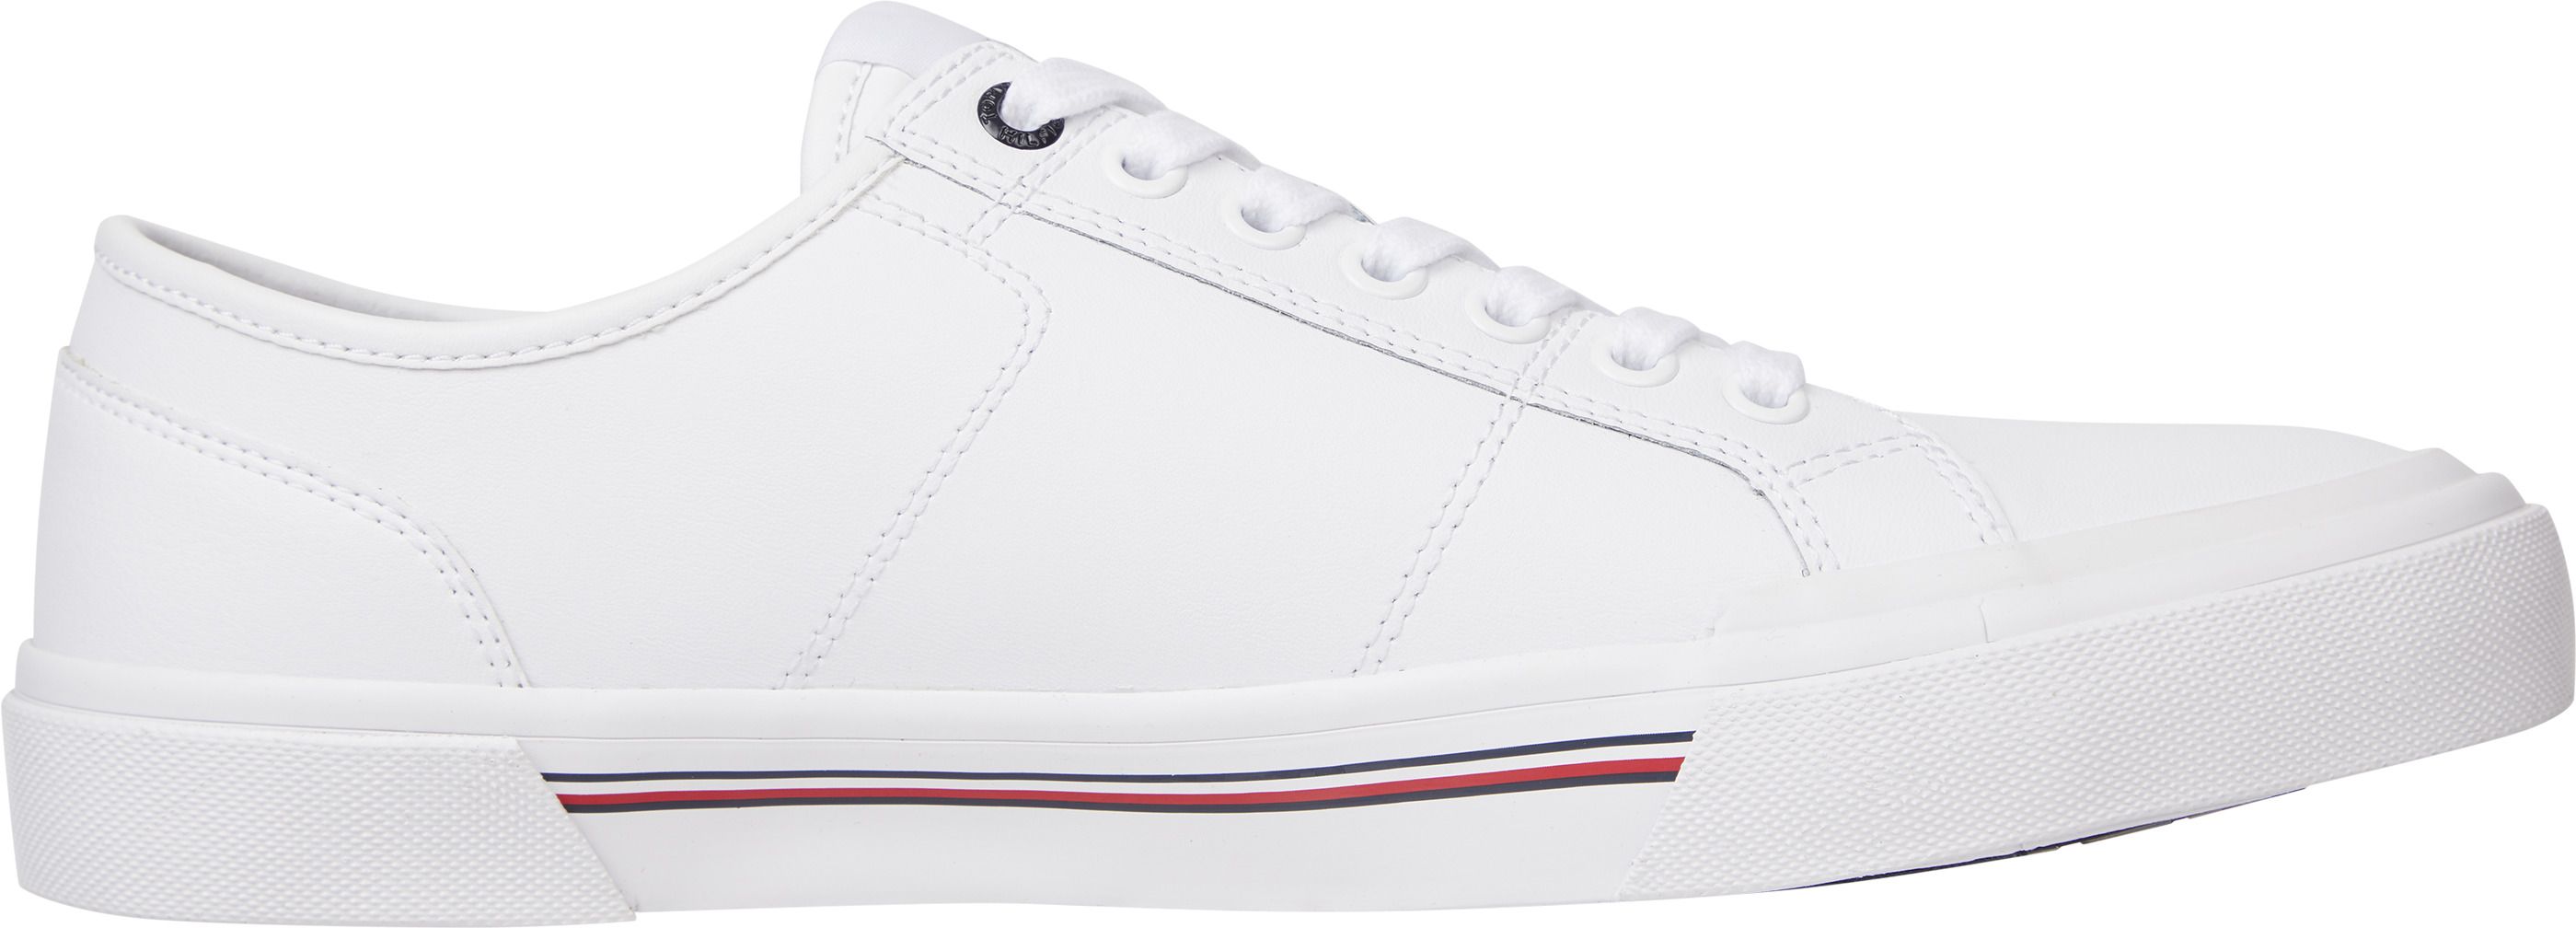 Tommy Hilfiger Core Corporate Sneakers